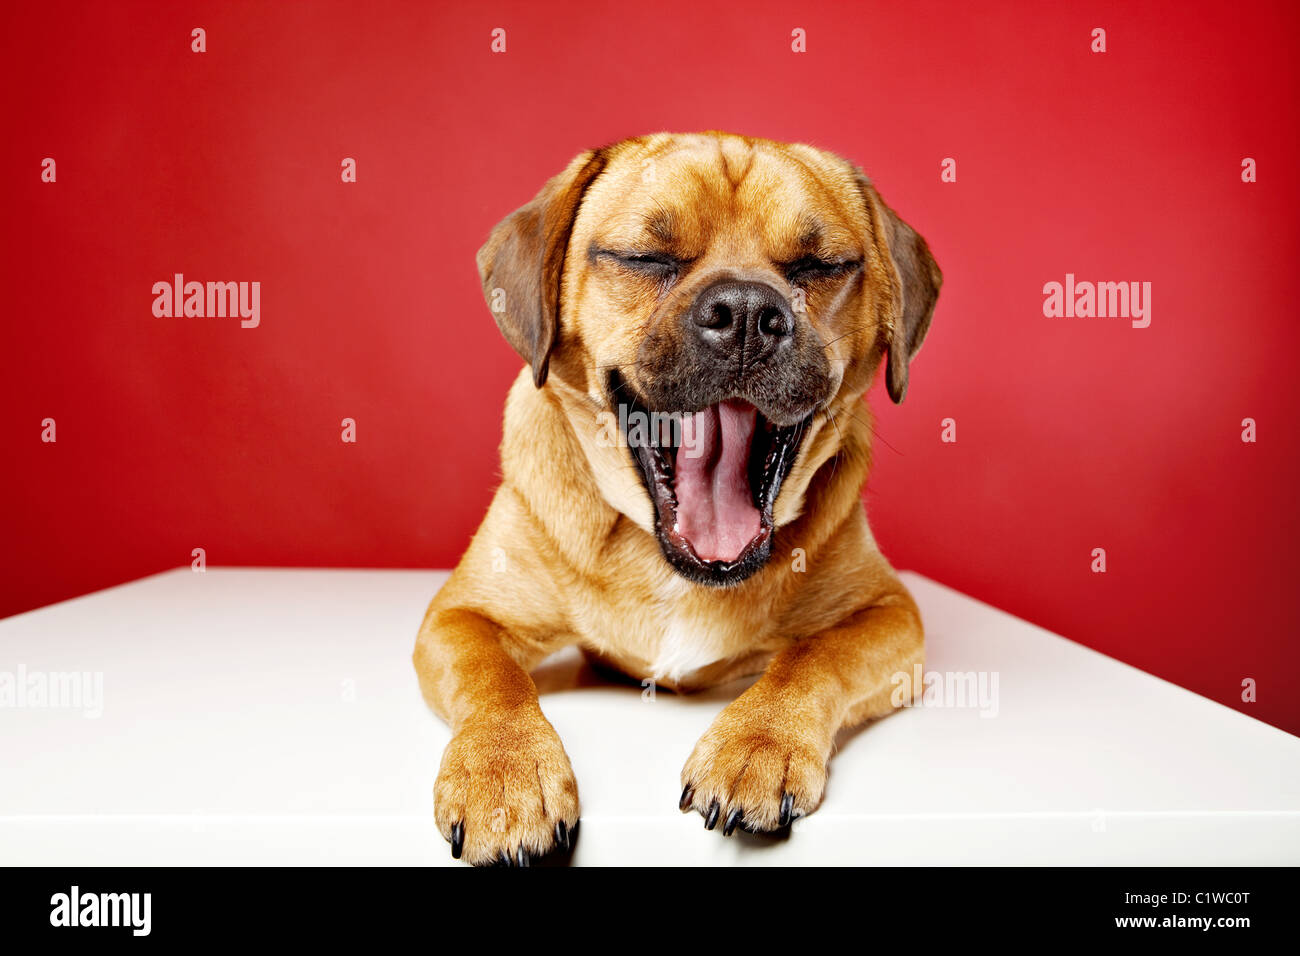 Puggle dog yawning but appears to be smiling or laughing. Red background in studio. Stock Photo